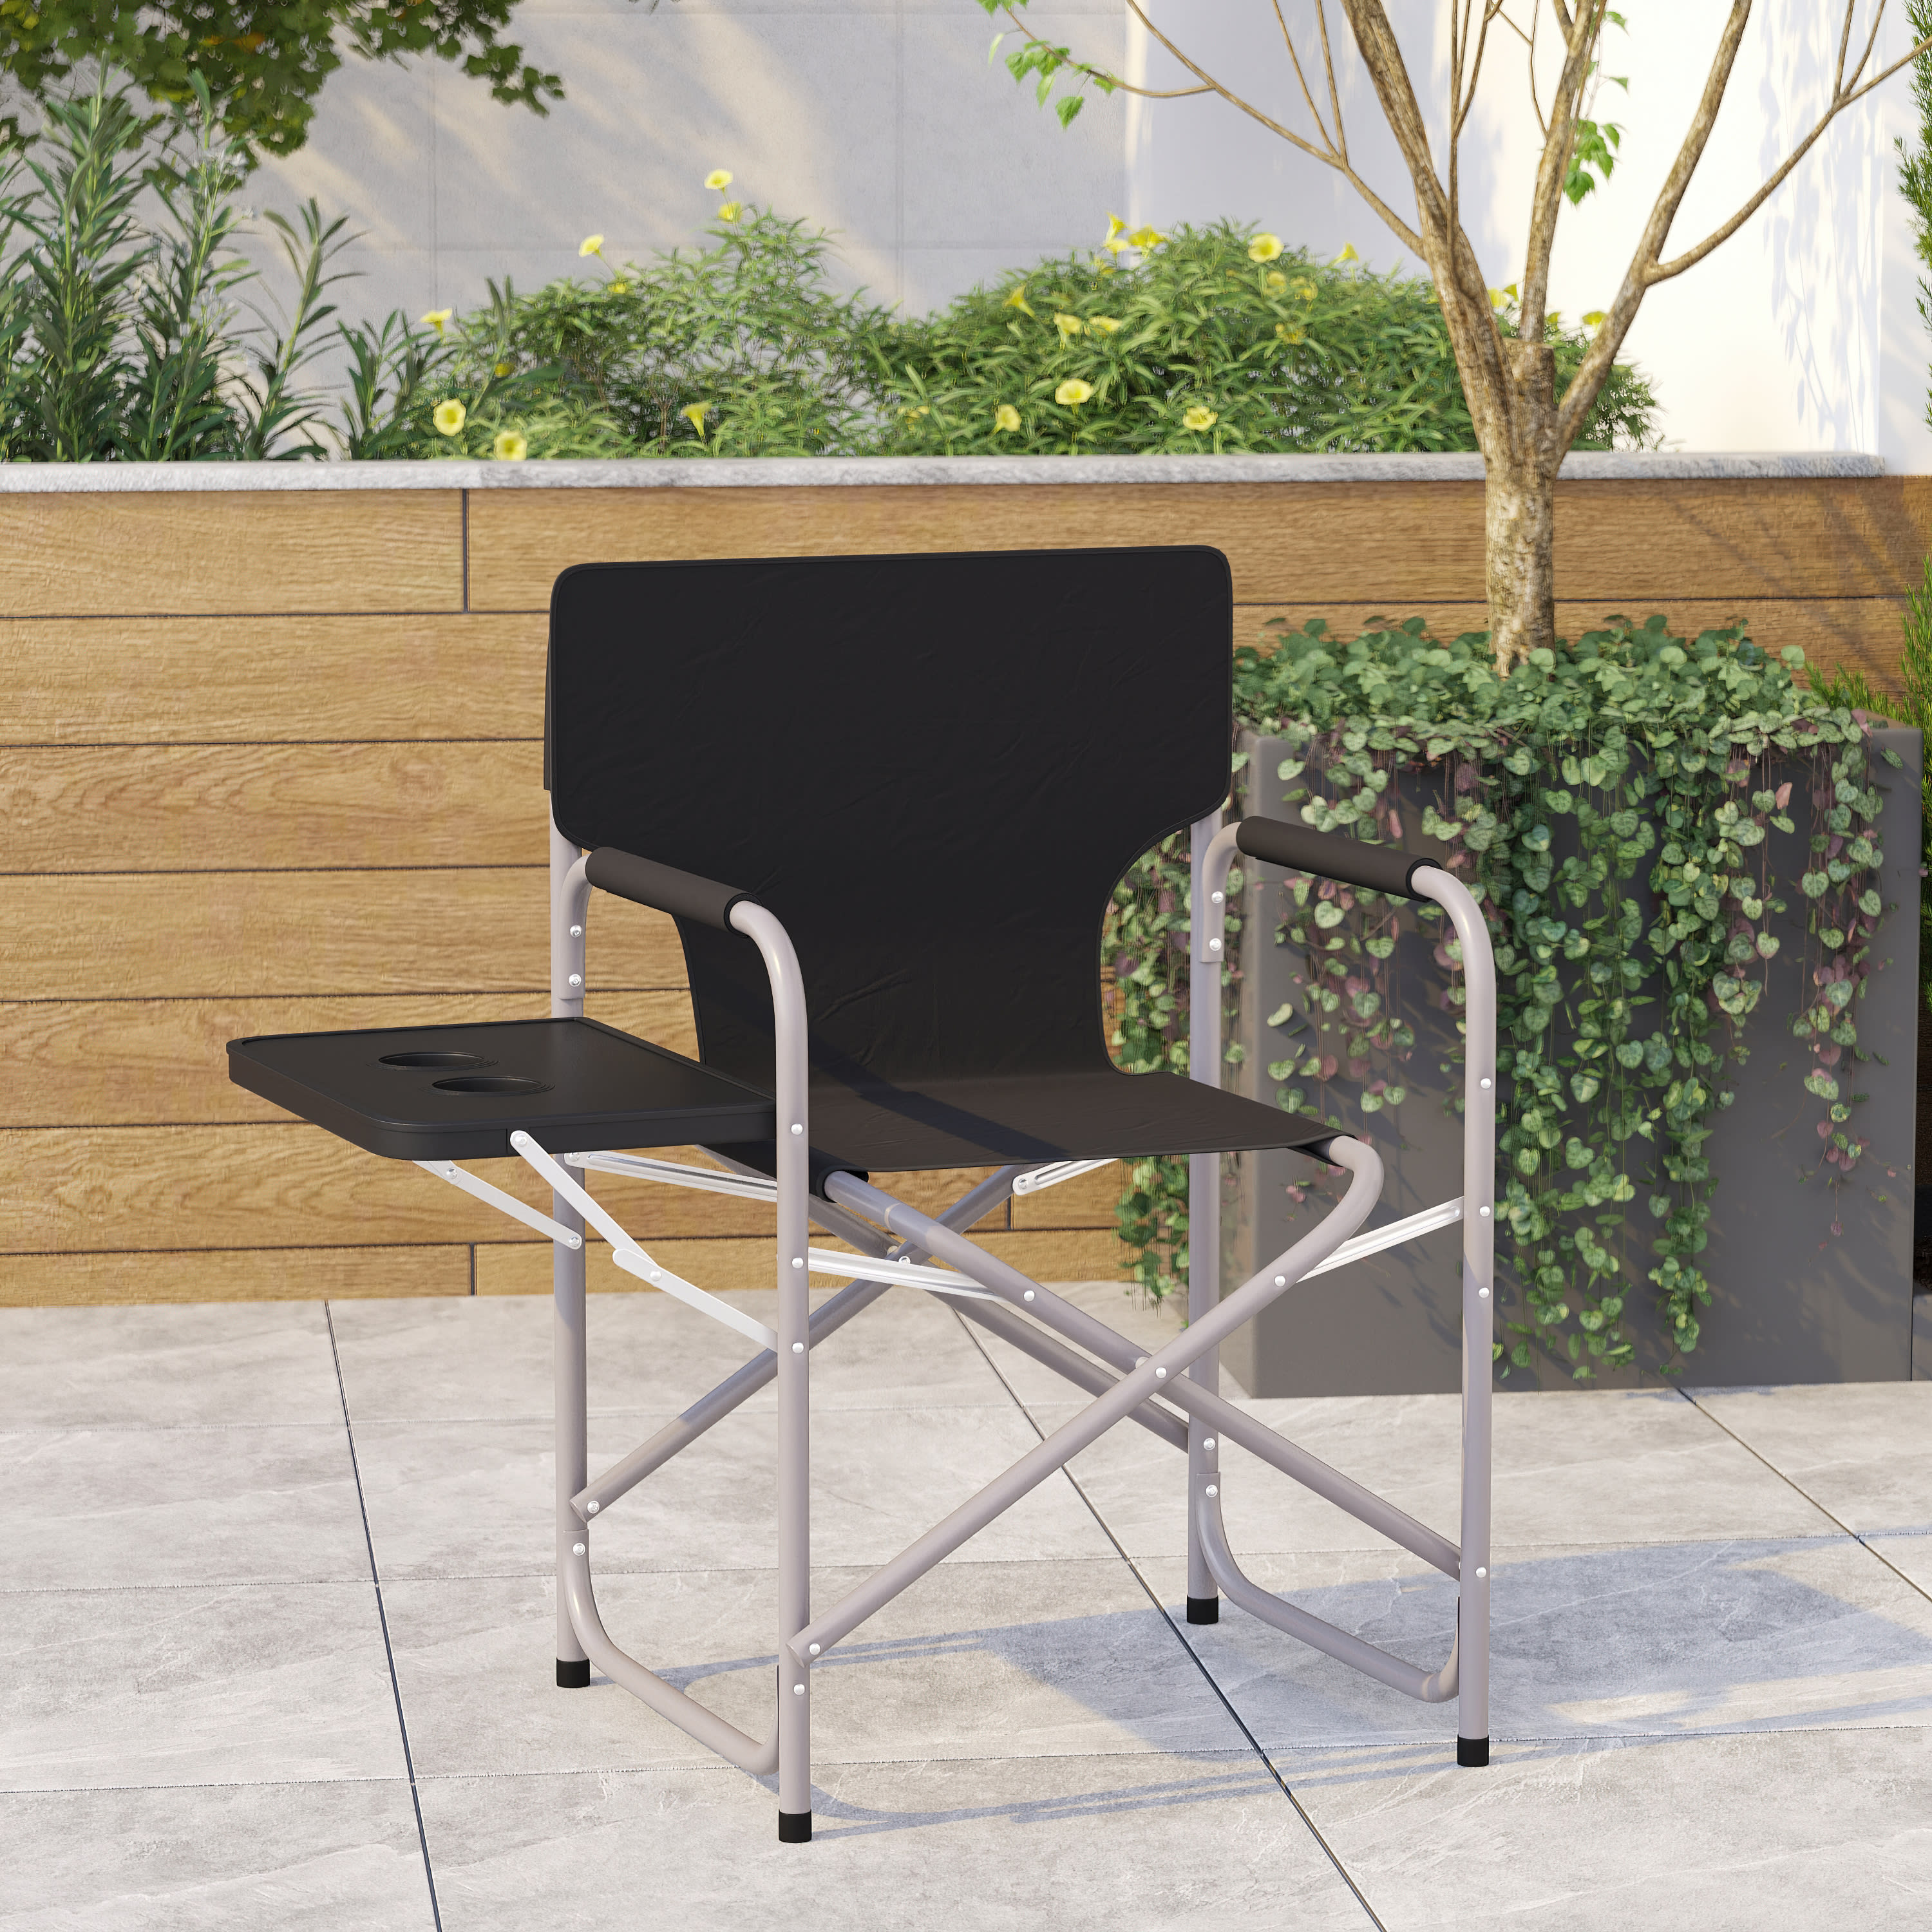 Emma + Oliver Black Canvas Folding Director's Chair with Gray Steel Tube Frame-Integrated Folding Side Table with Cupholders - image 1 of 12